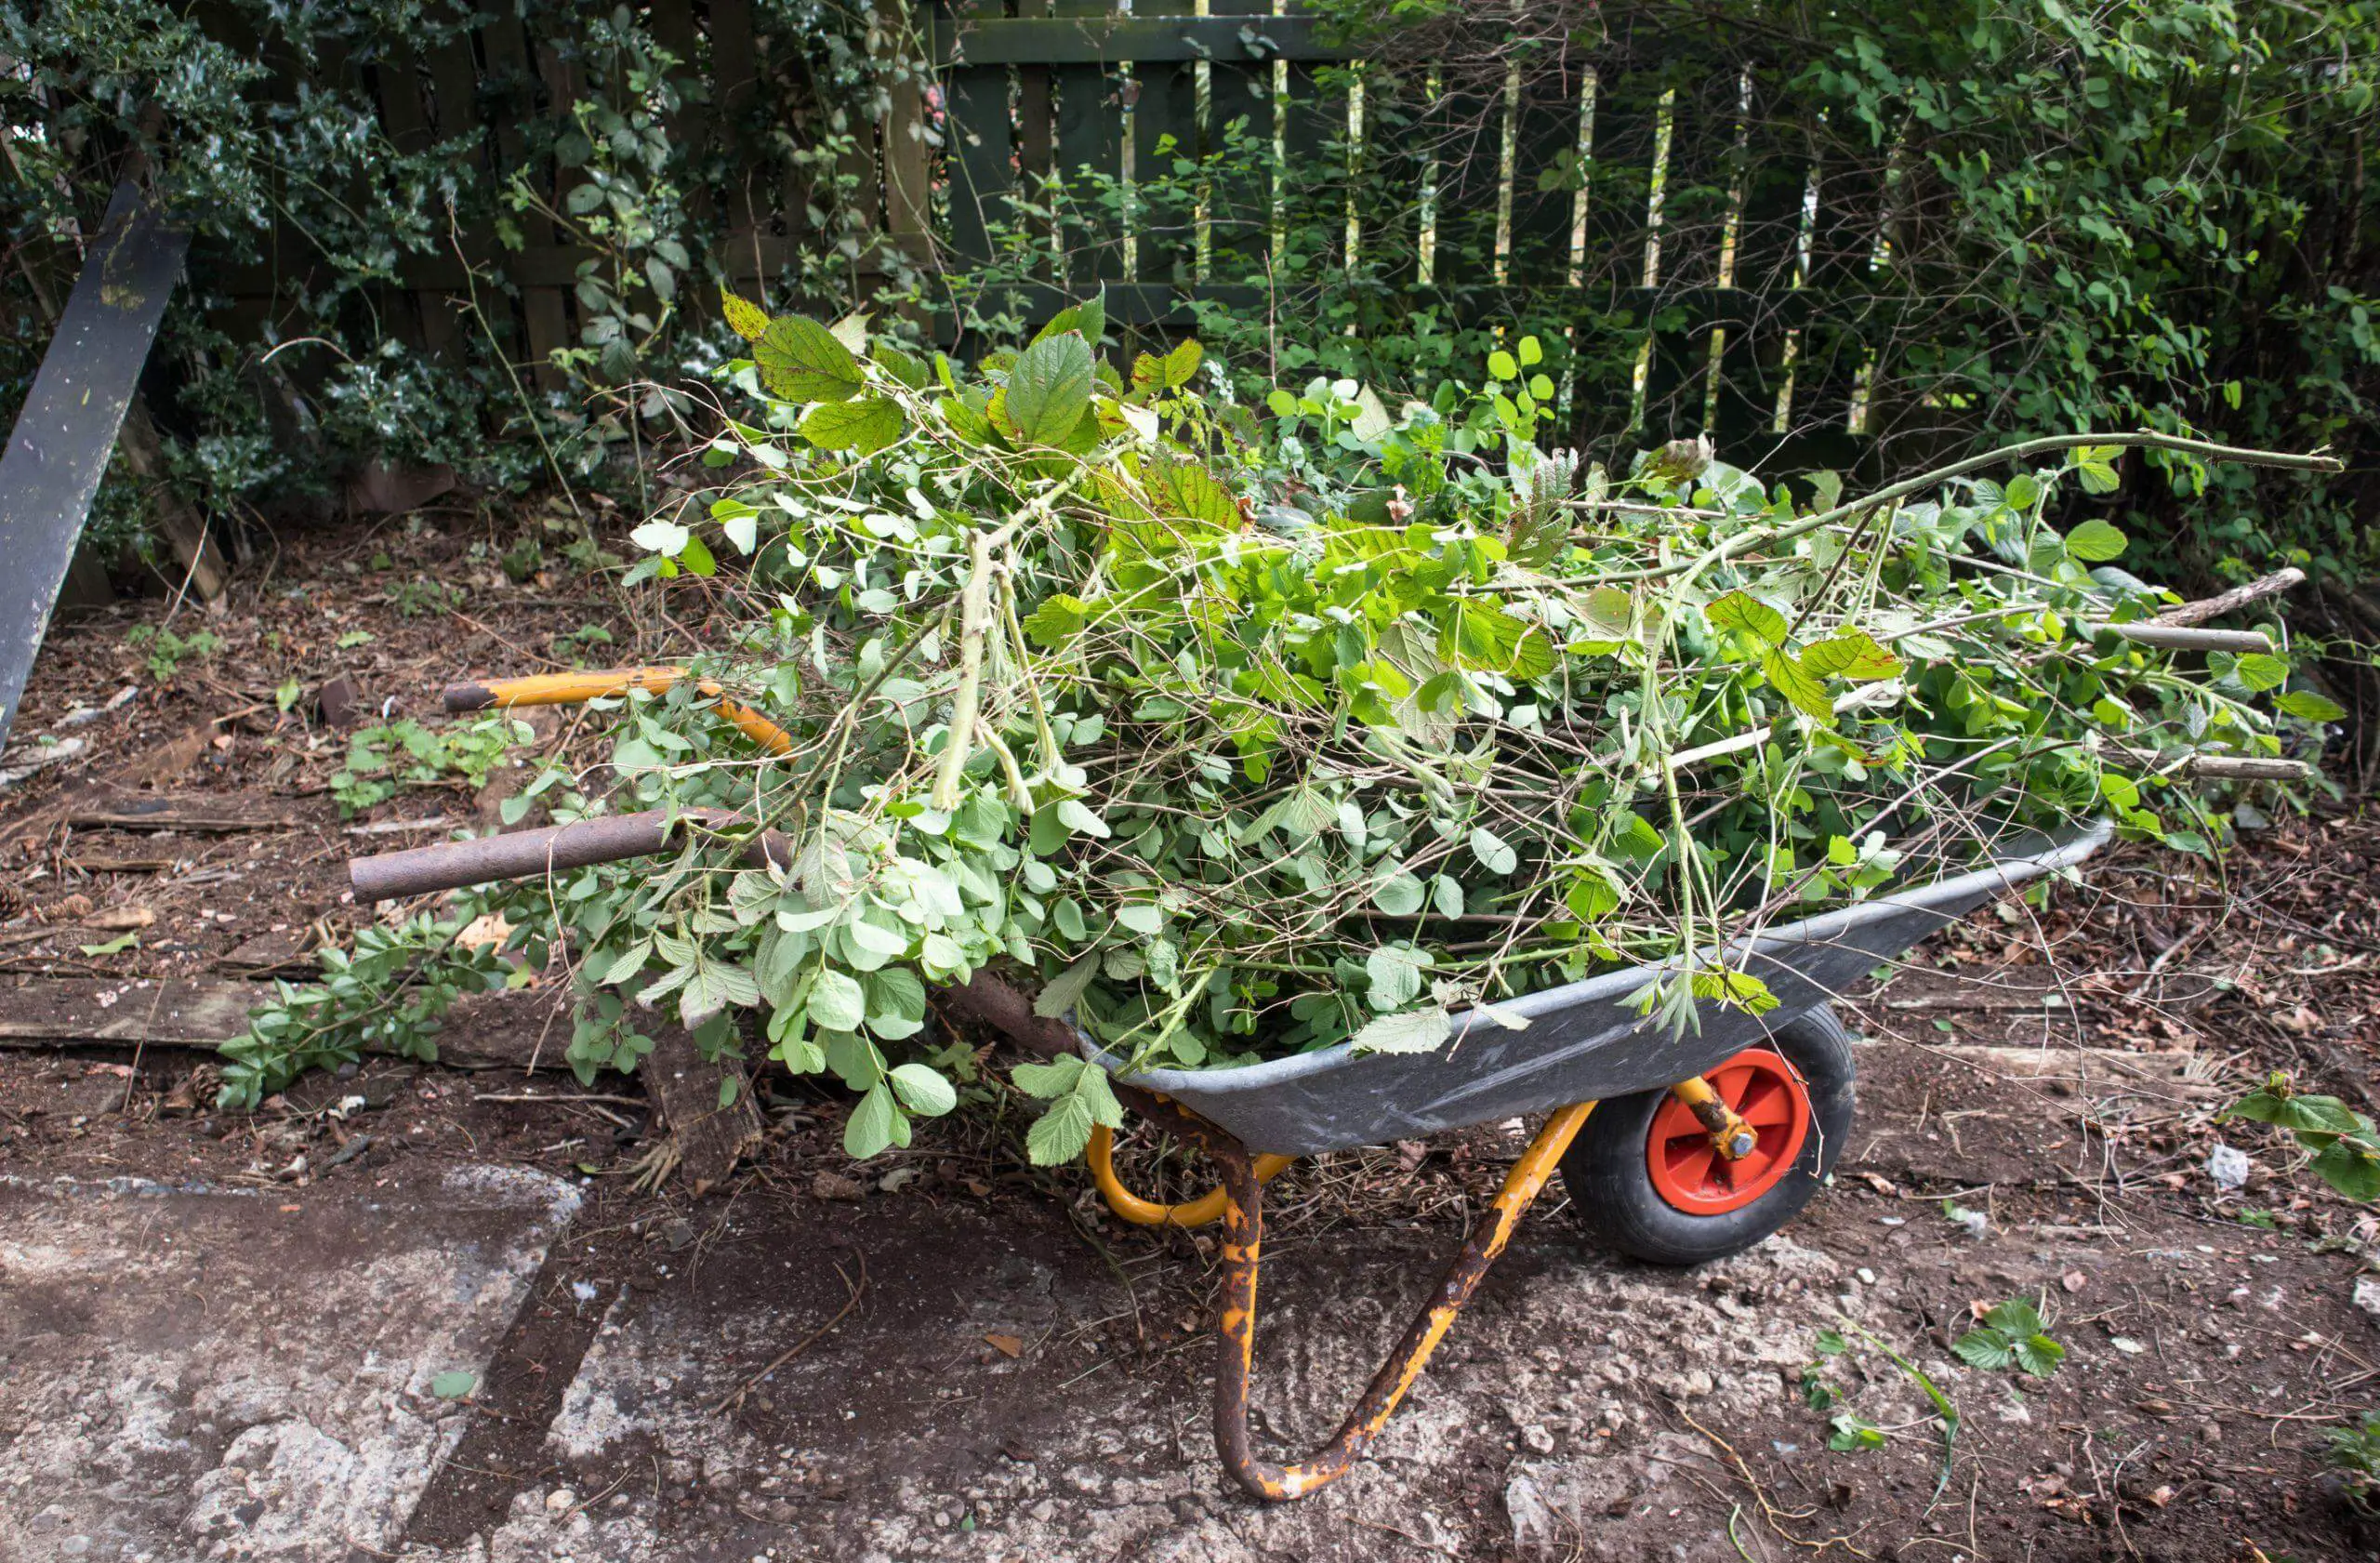 Wheel barrow in a garden piled full with foliage and greenery ready to be moved